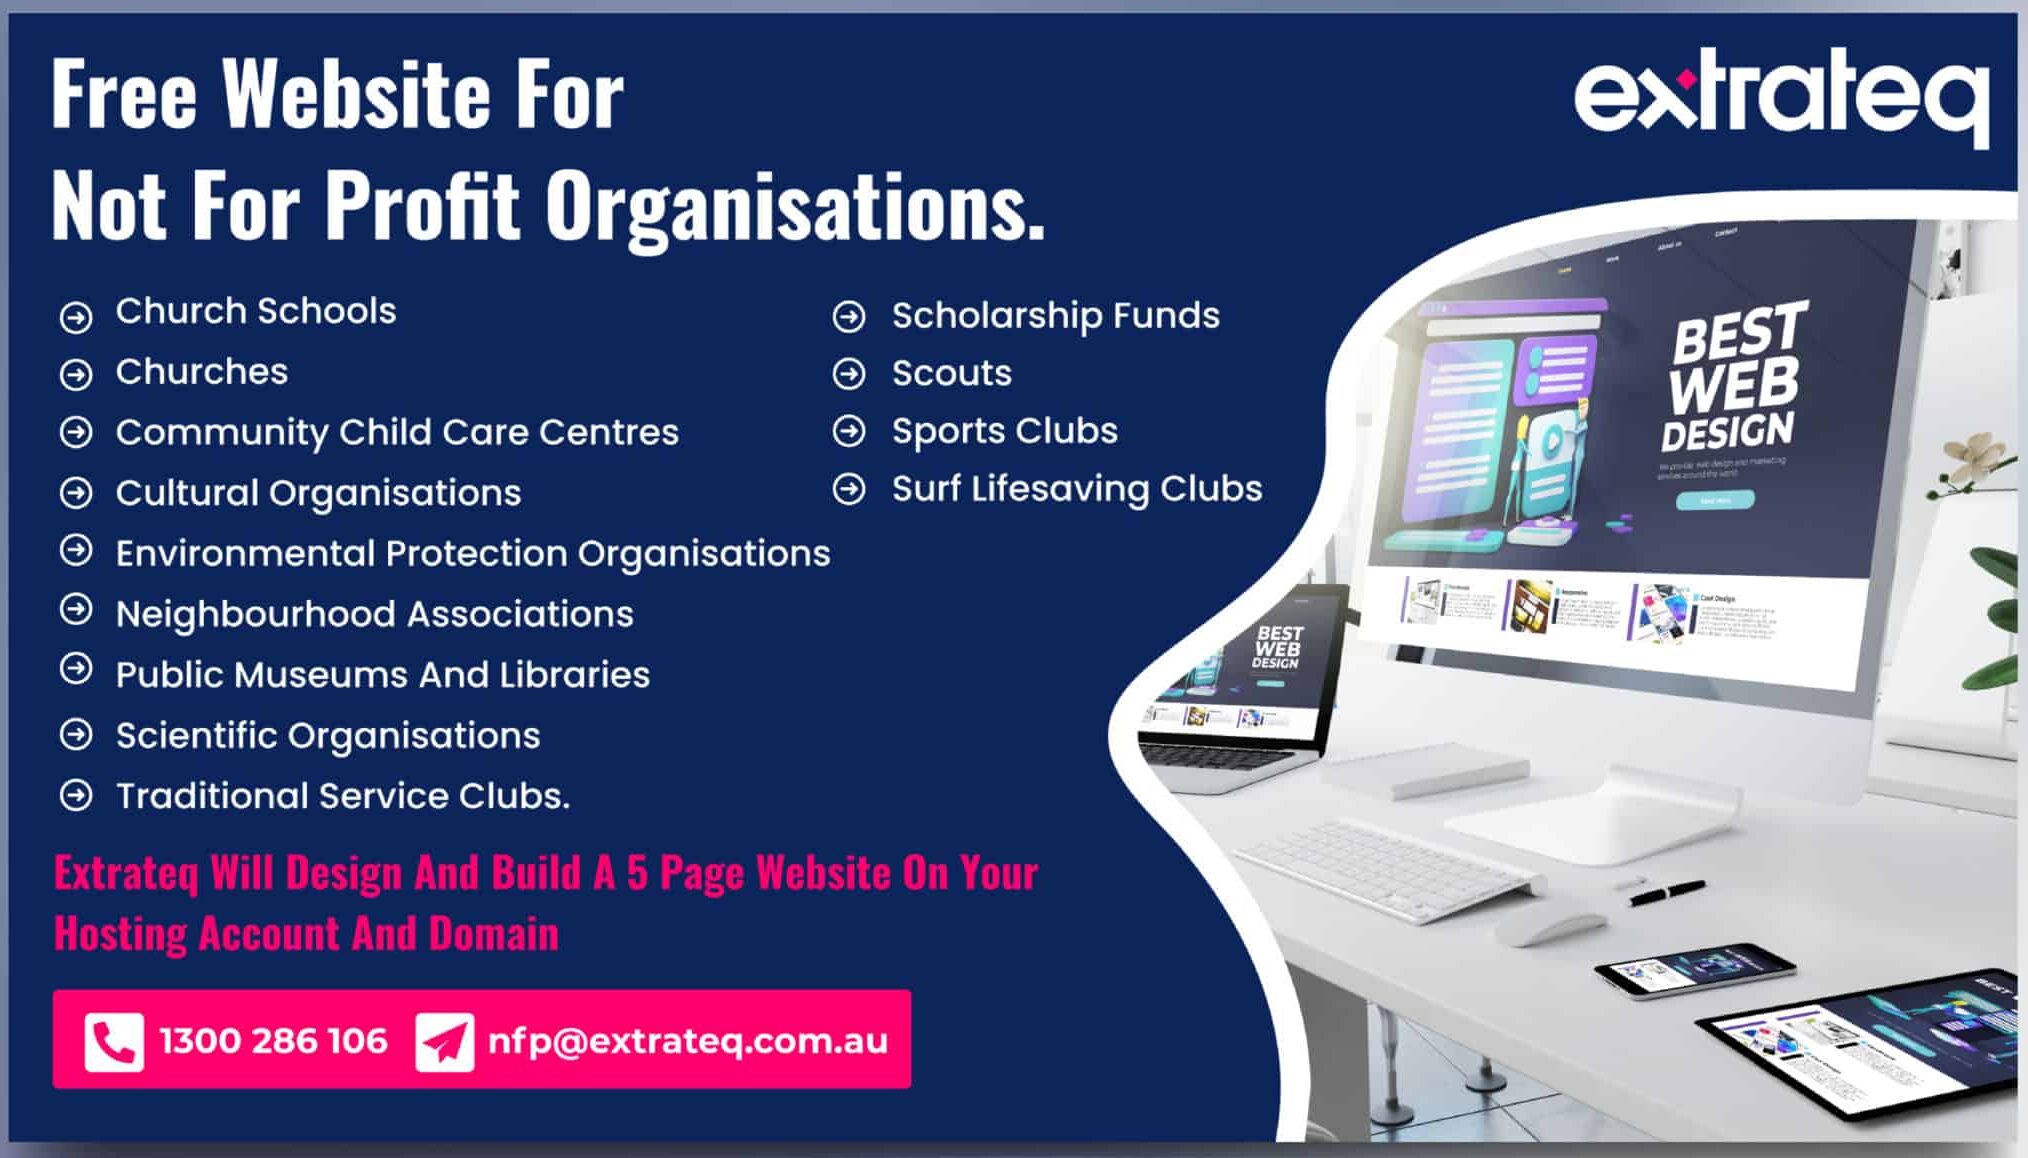 list of not for profit organisations which extrateq will be building free website